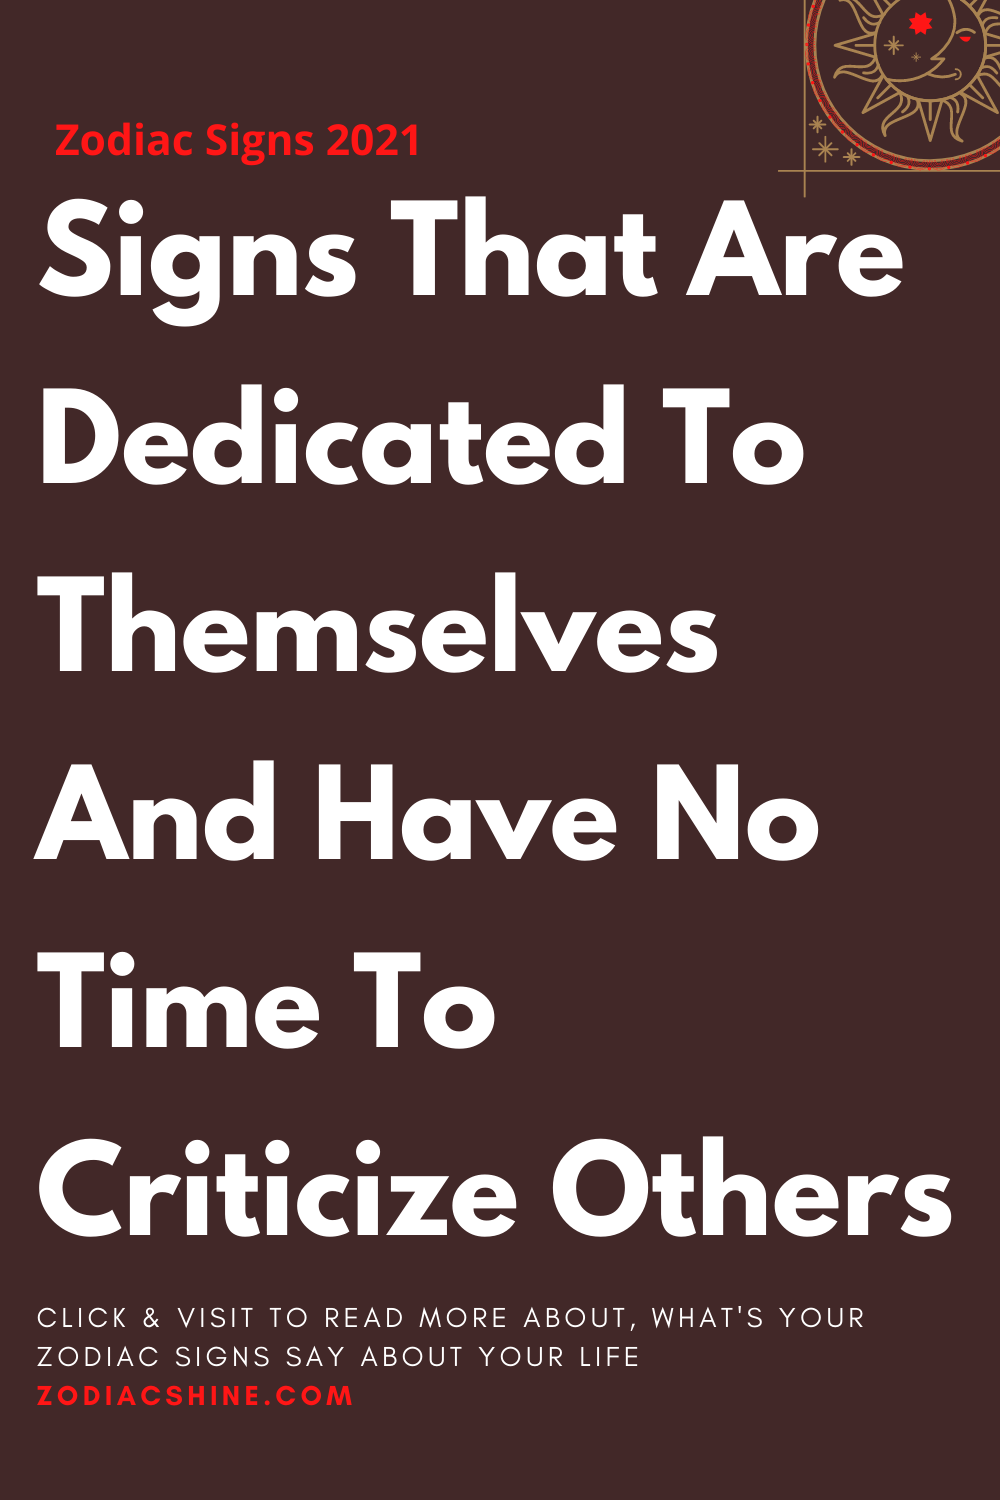 Signs That Are Dedicated To Themselves And Have No Time To Criticize Others